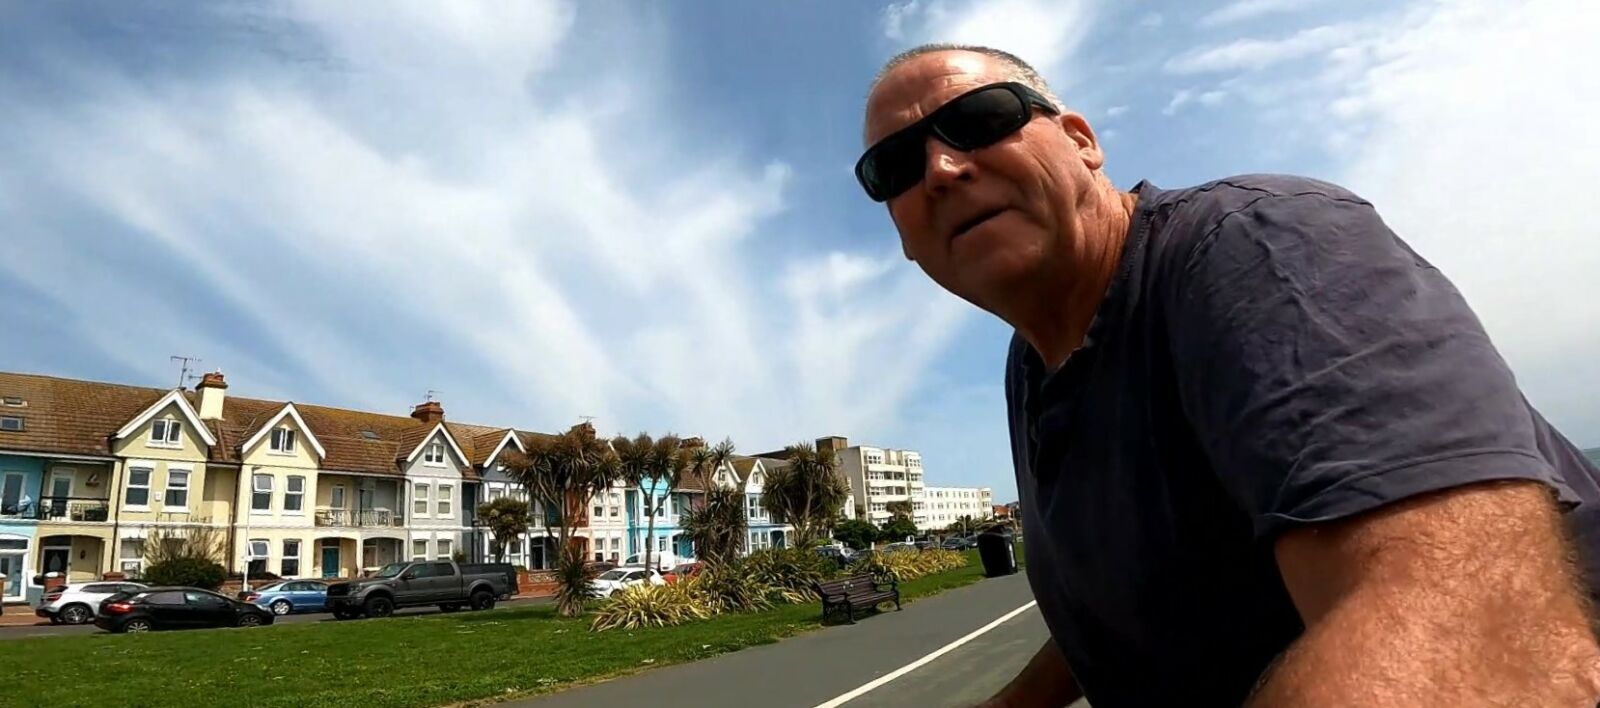 Houses and man in sunglasses